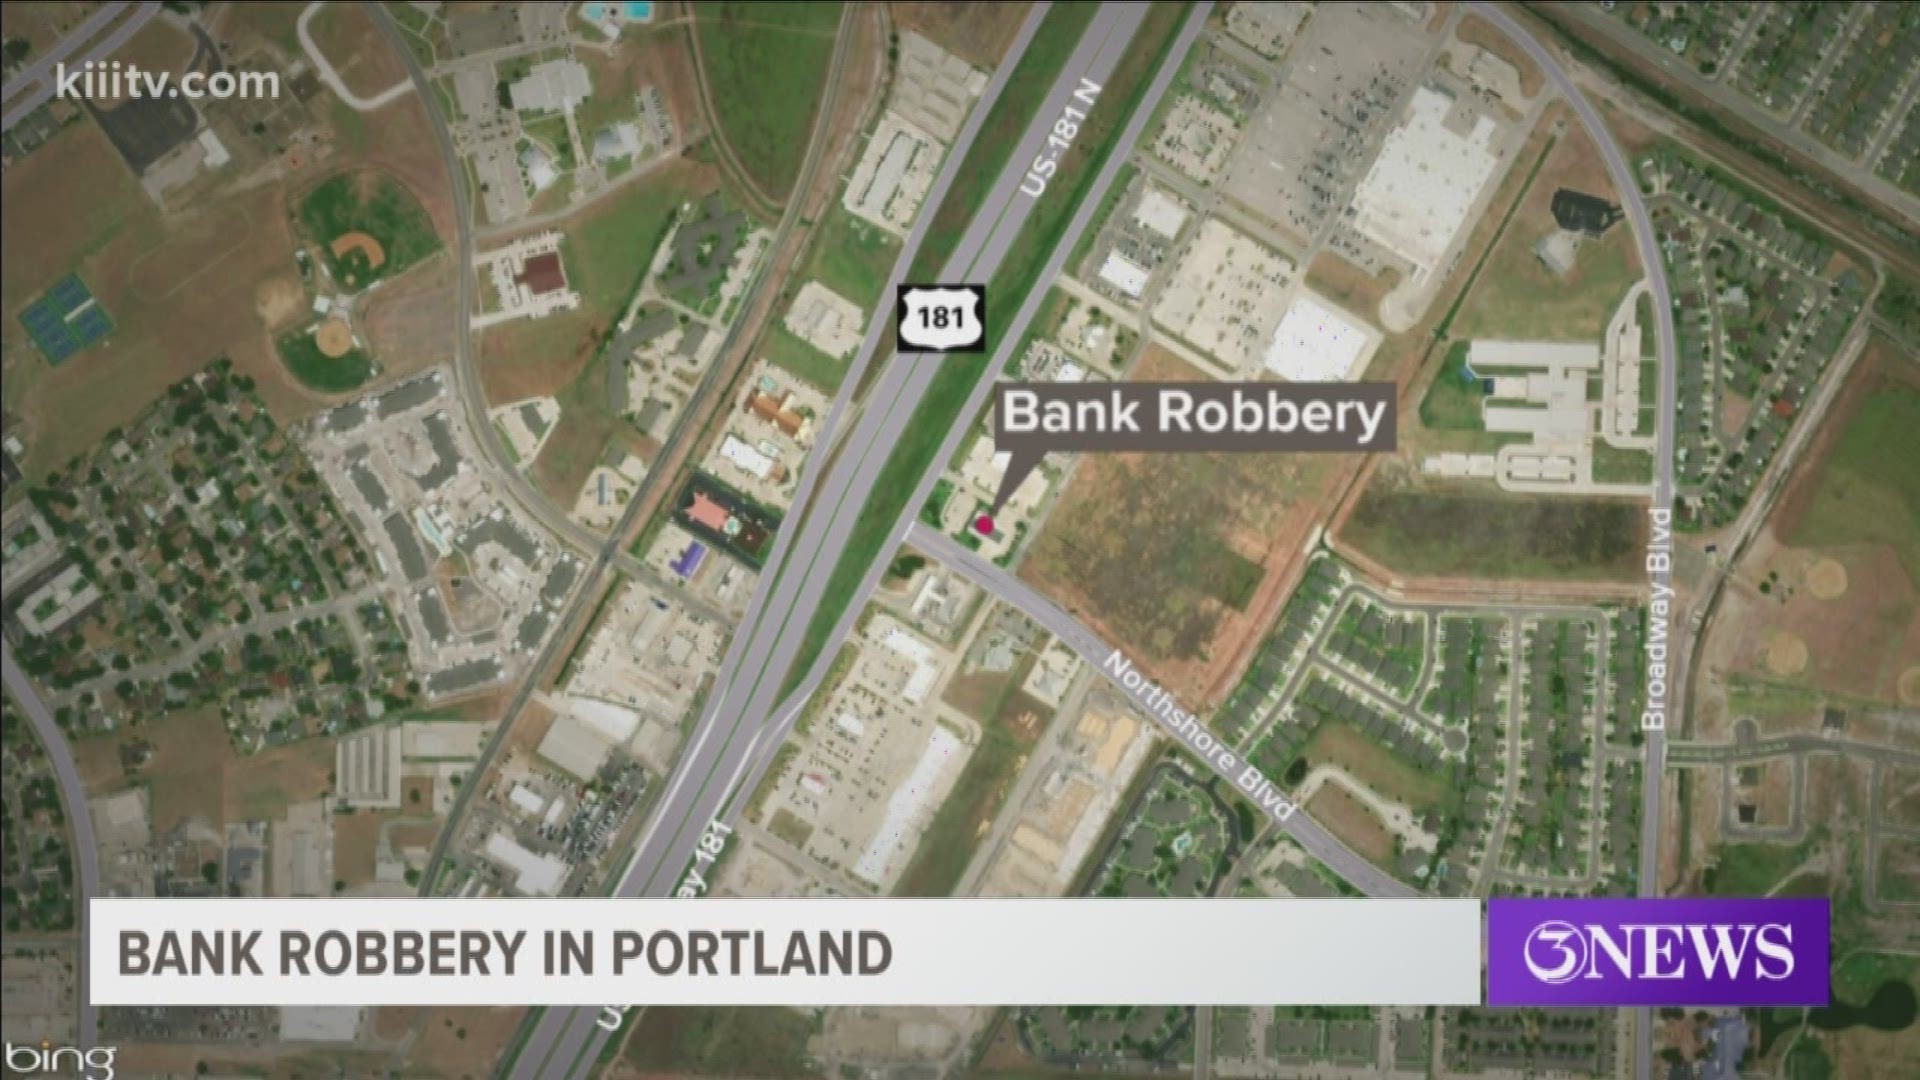 Police are investigating a bank robbery that happened in Portland, Texas, just after 12:30 p.m. Friday.